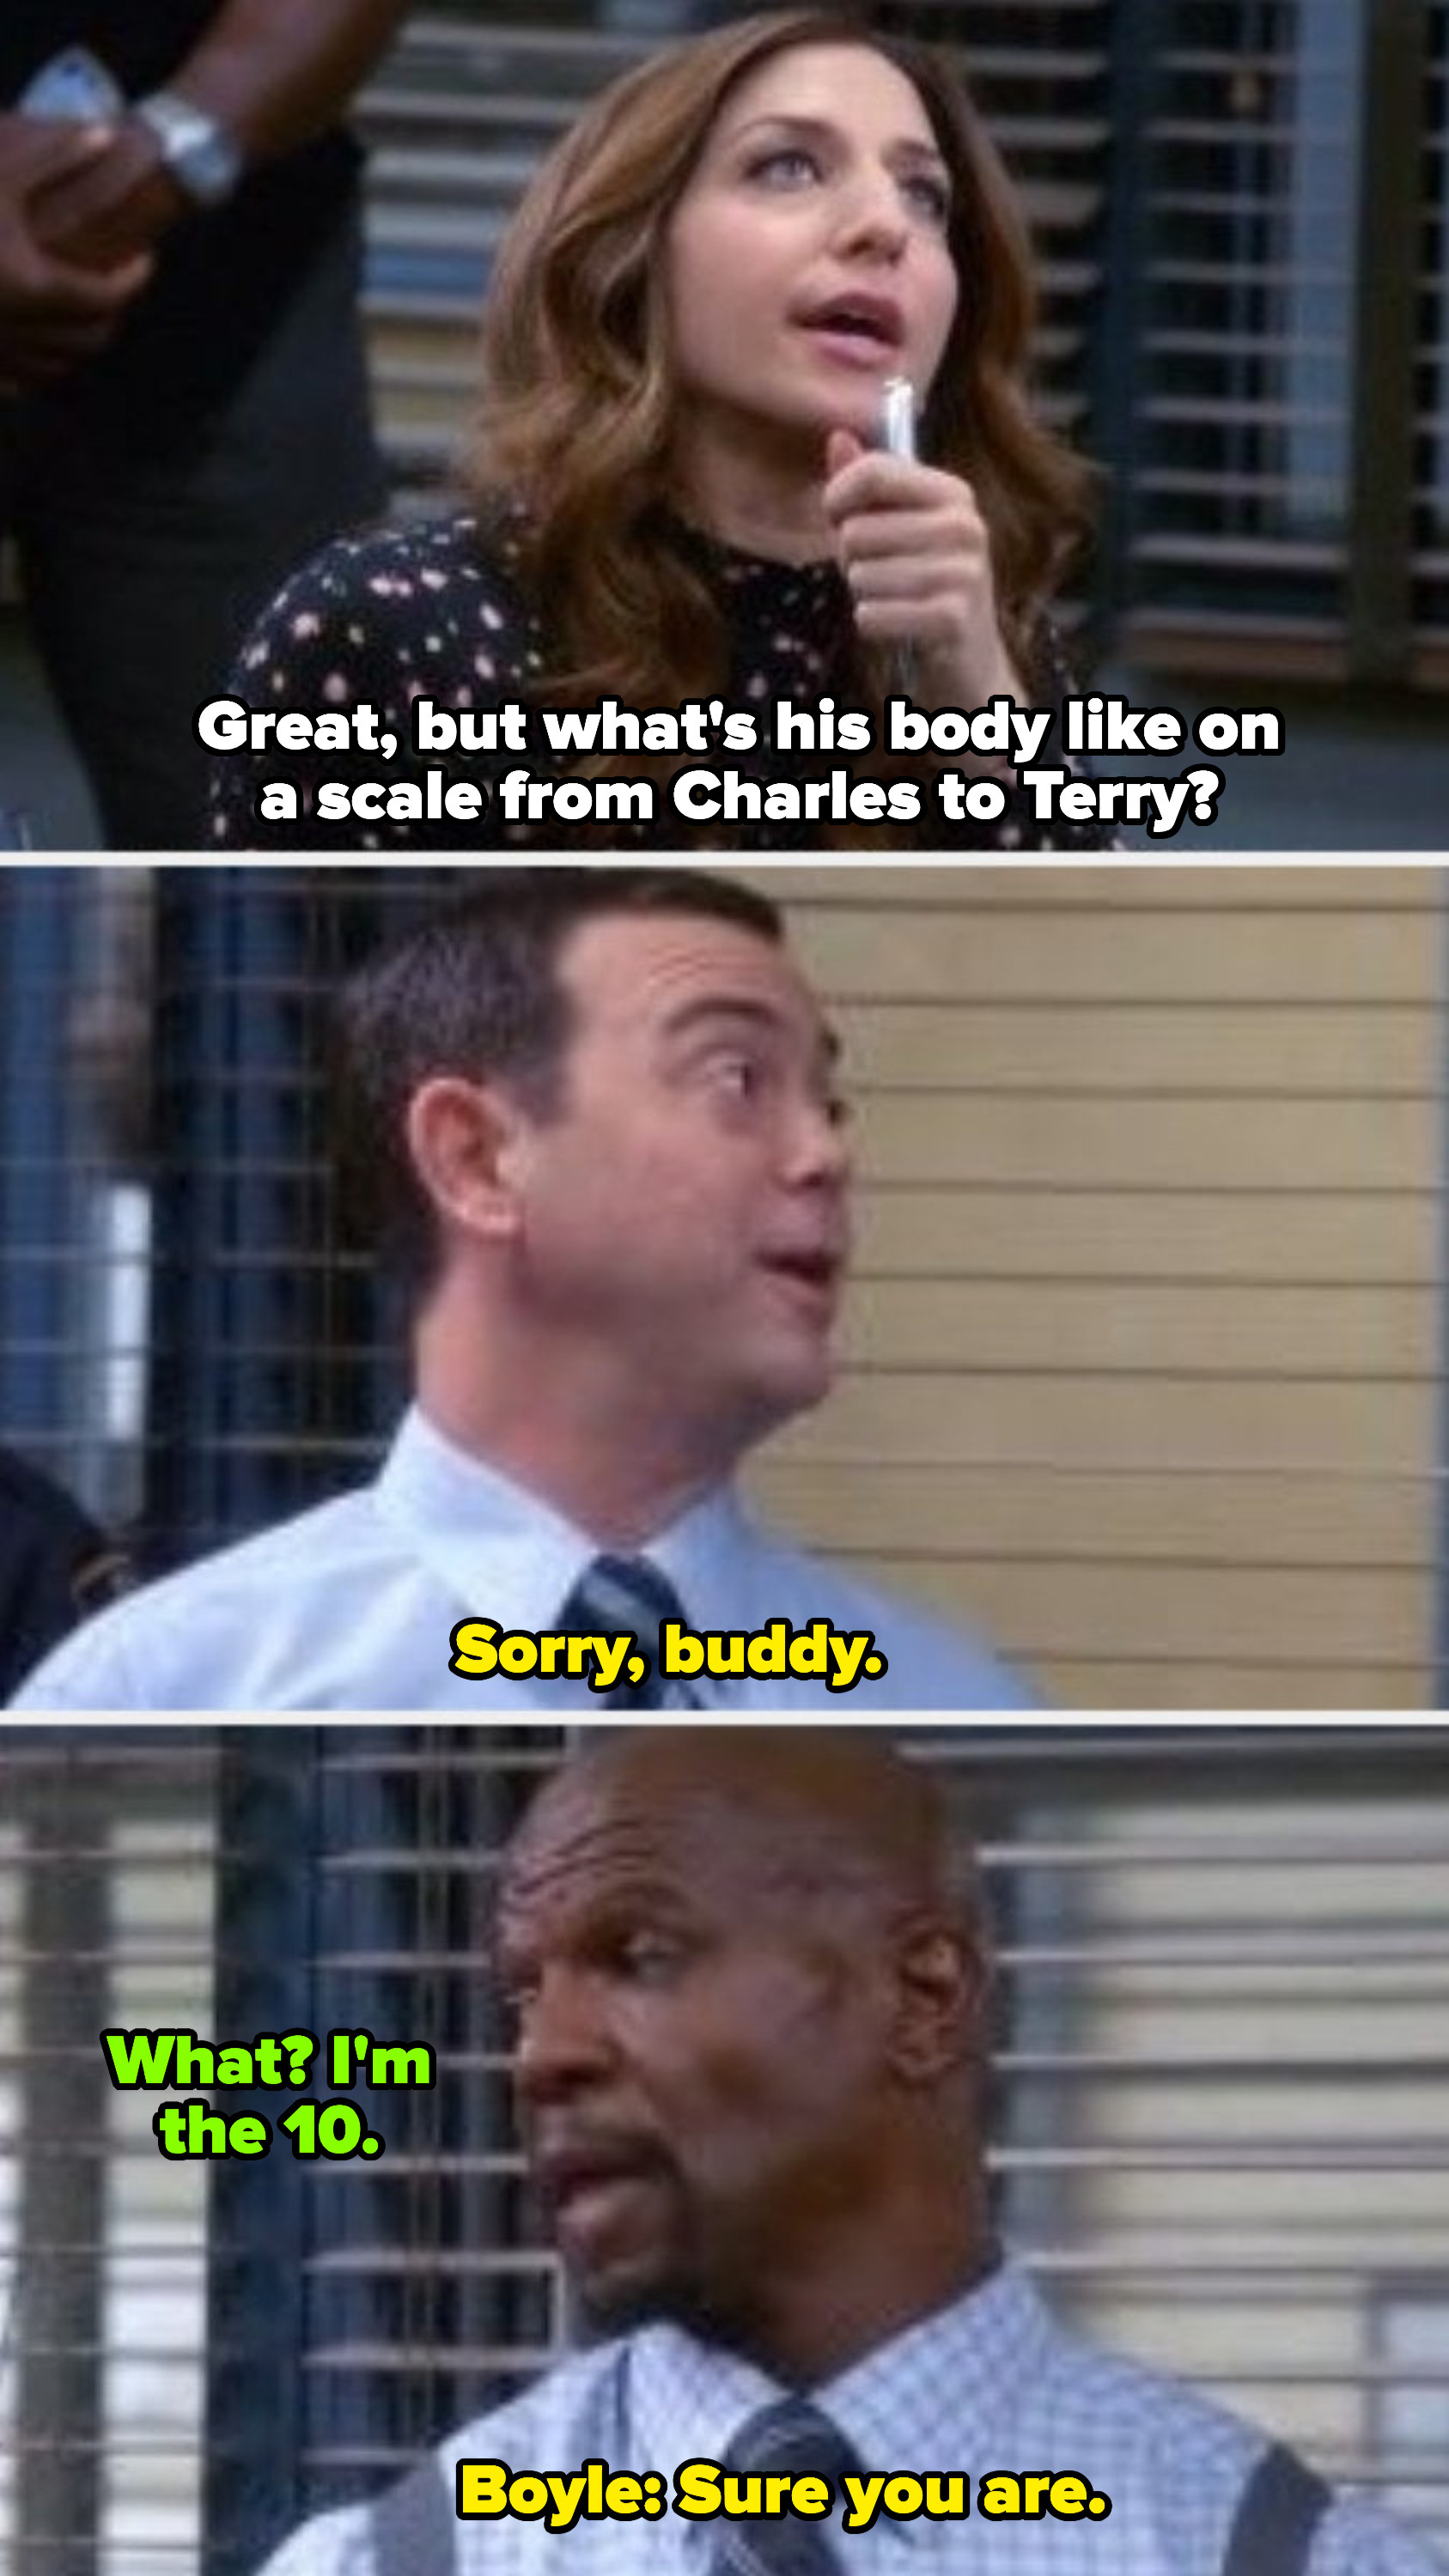 Charles: &quot;Sorry, buddy.&quot; Terry: &quot;What? I&#x27;m the 10.&quot; Charles: &quot;Sure you are&quot;